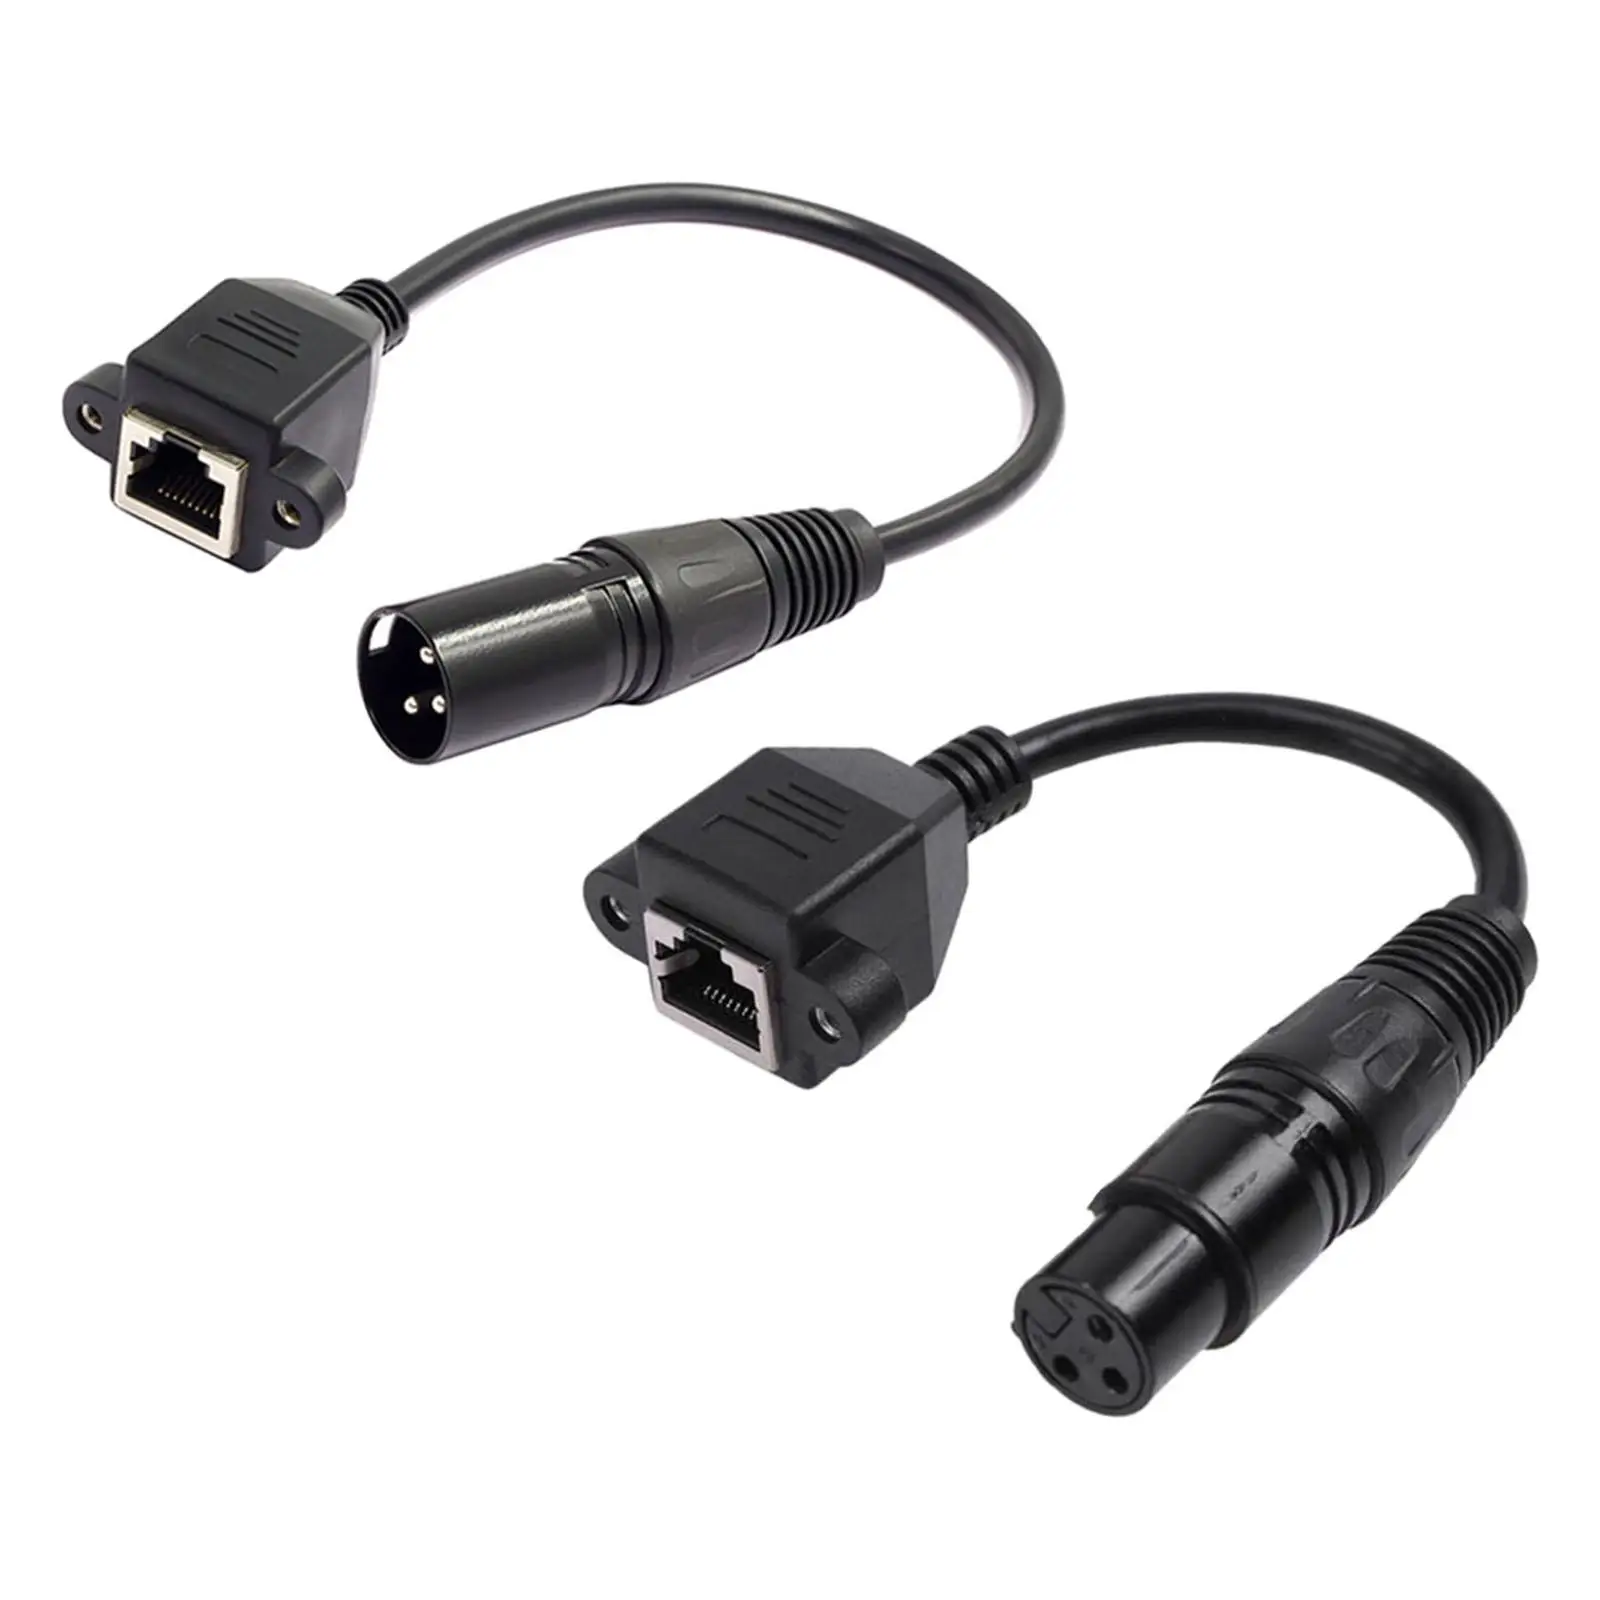 1 Pair 3 Pin XLR to Female Male Adapter Cables, Converter Cable for Dmx Con Controller Series